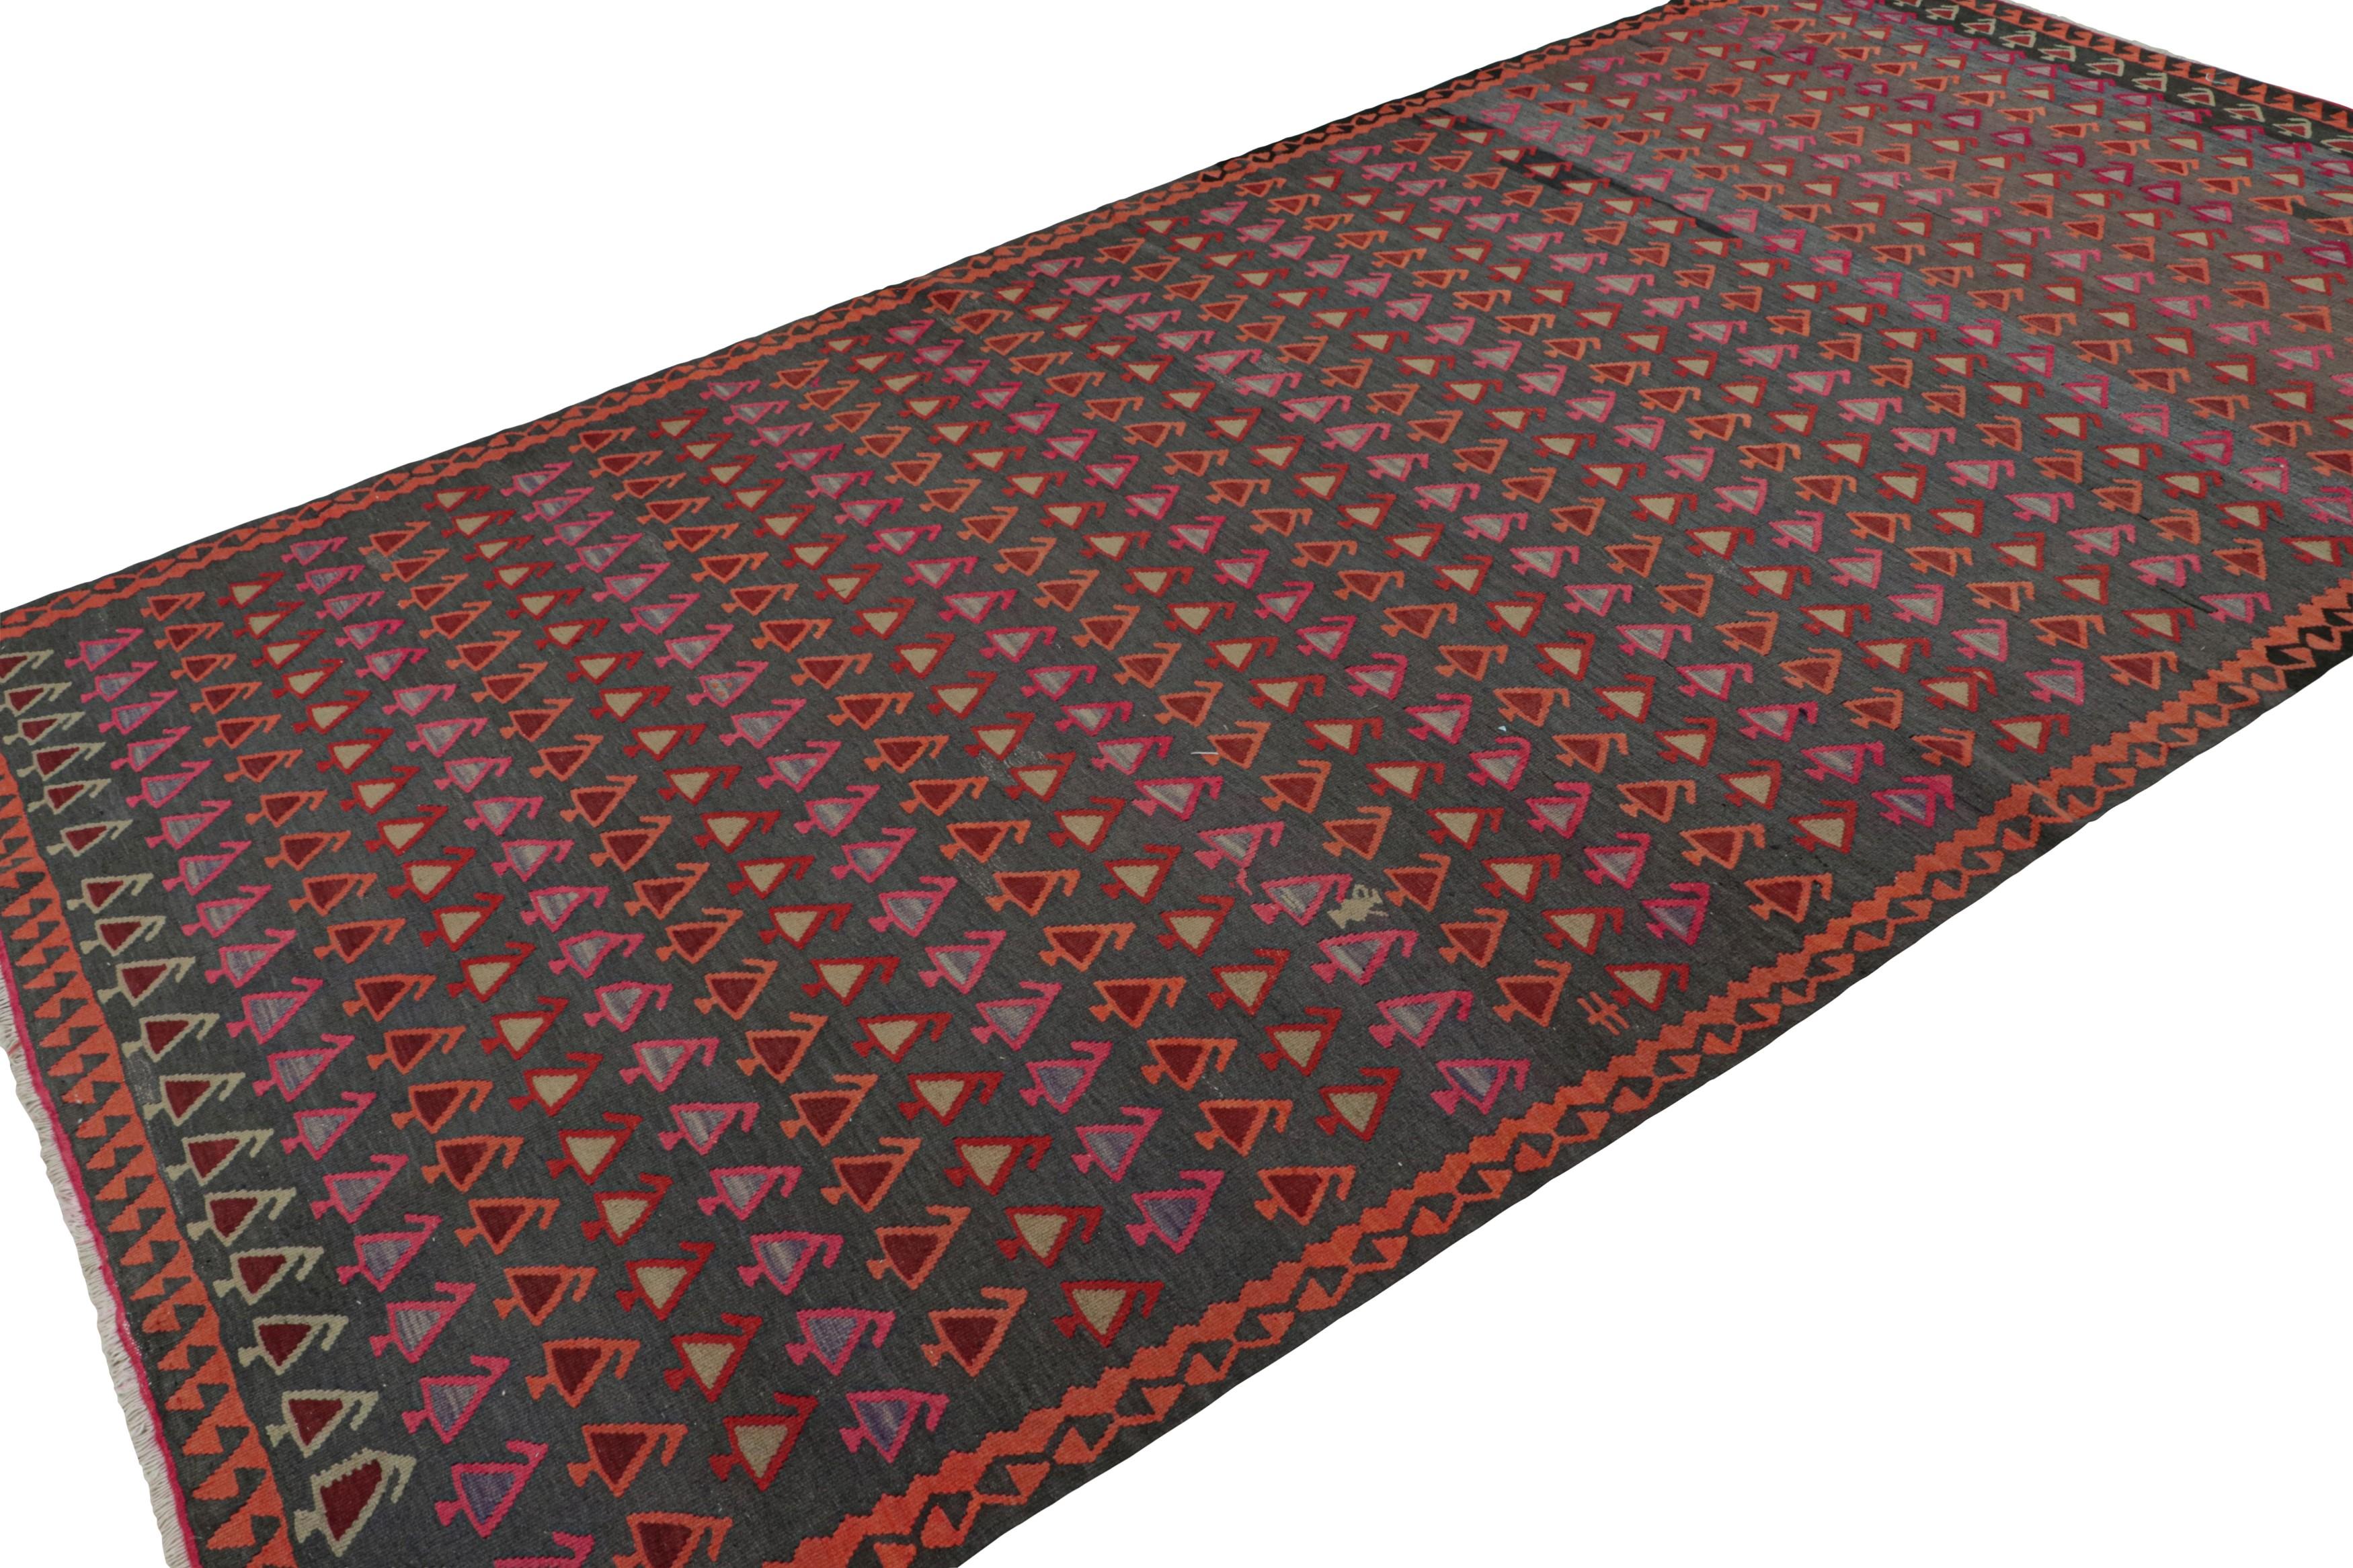 Handwoven in wool circa 1950-1960, this 6x12 vintage Afghan kilim is a new curation from Rug & Kilim’s collection. 

On the Design:

Specifically believed to be coming from tribal weavers, this 6x12 flatweave boasts a rich personality with